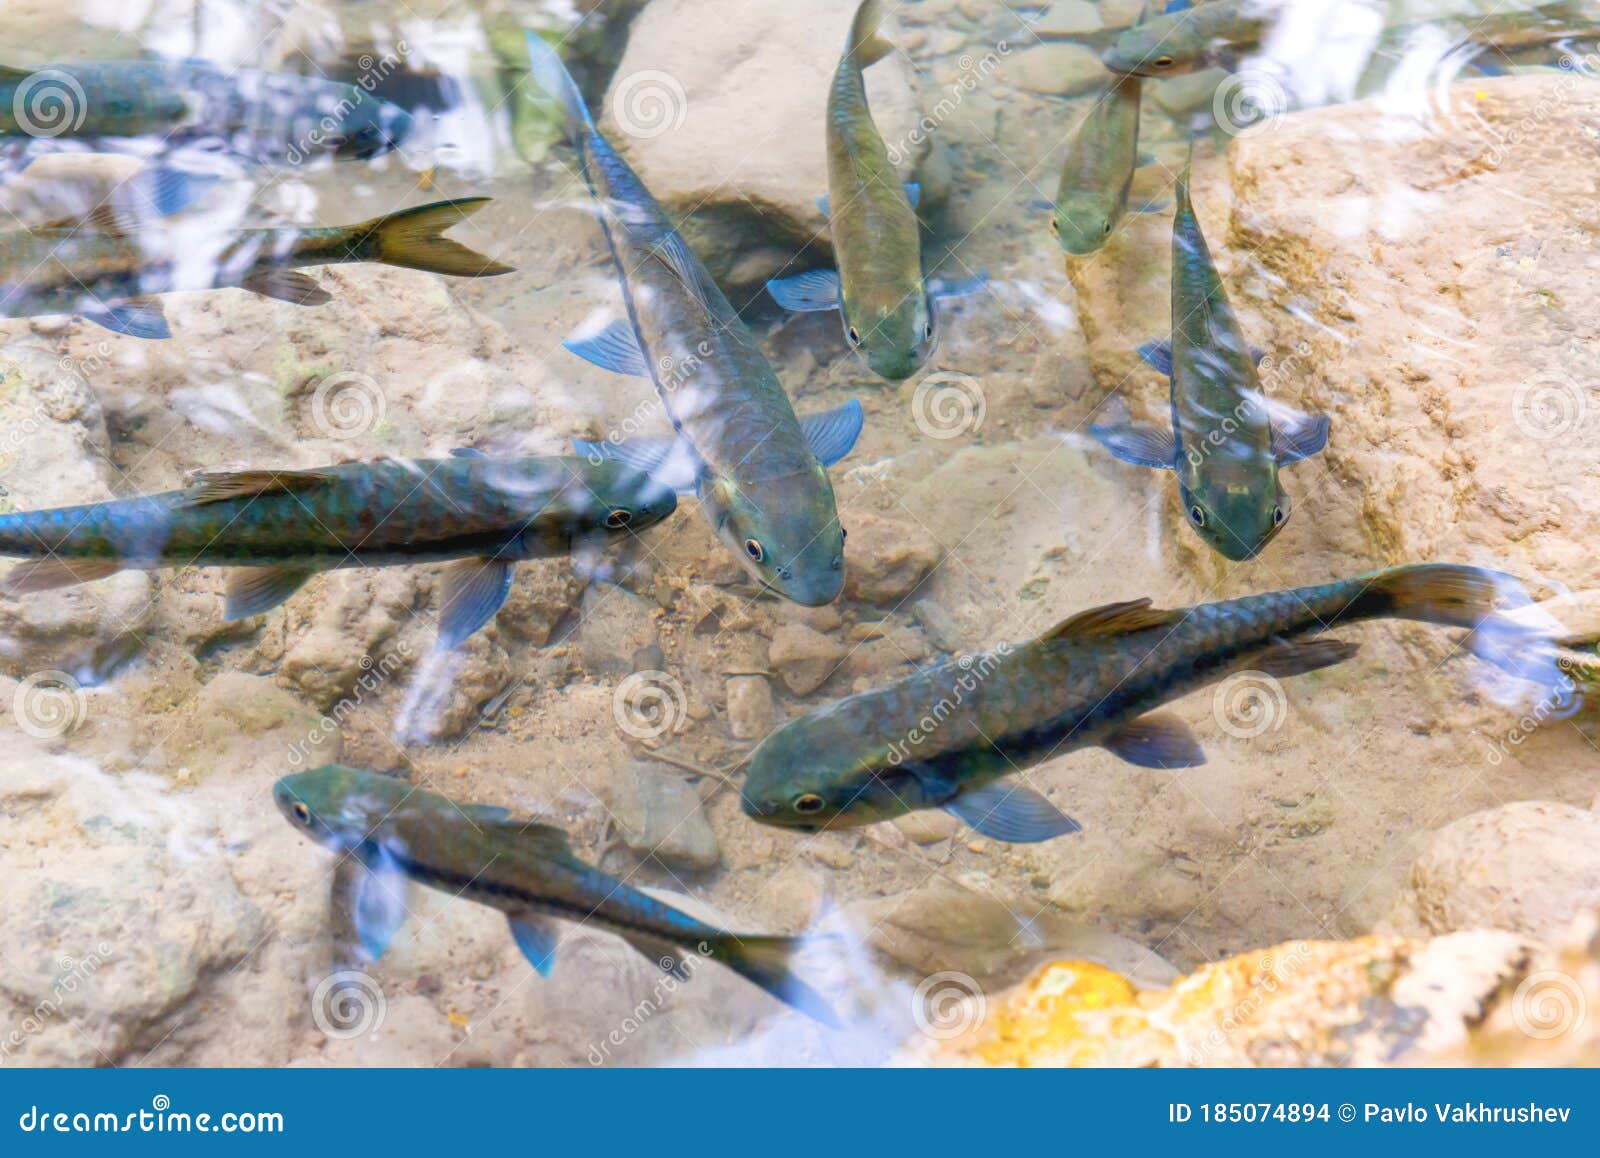 red garra fishes in river water